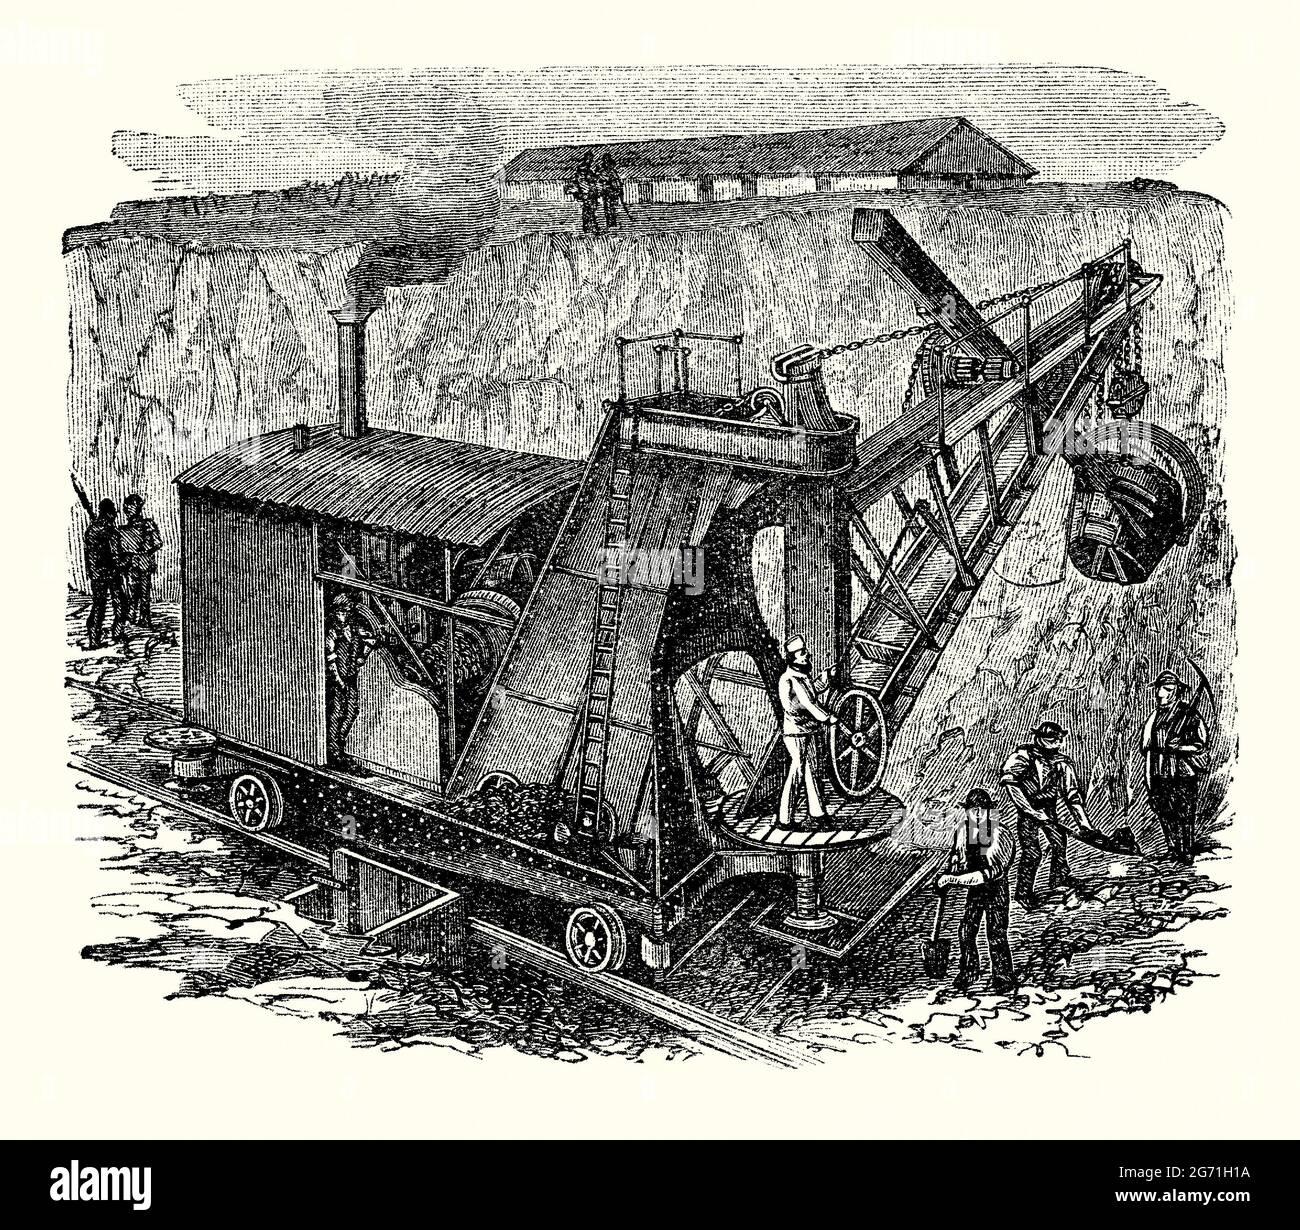 An old engraving of steam shovel or navvy during Victorian times. It is from a book of the 1890s on discoveries and inventions during the 1800s. A steam shovel is a large steam-powered excavating machine designed for lifting and moving material such as rock and soil. This version, an ‘English Steam Navvy’, uses a giant ladle or scoop to scrape up the side of a cutting. A steam locomotive with open trucks takes the spoil from the site. Stock Photo